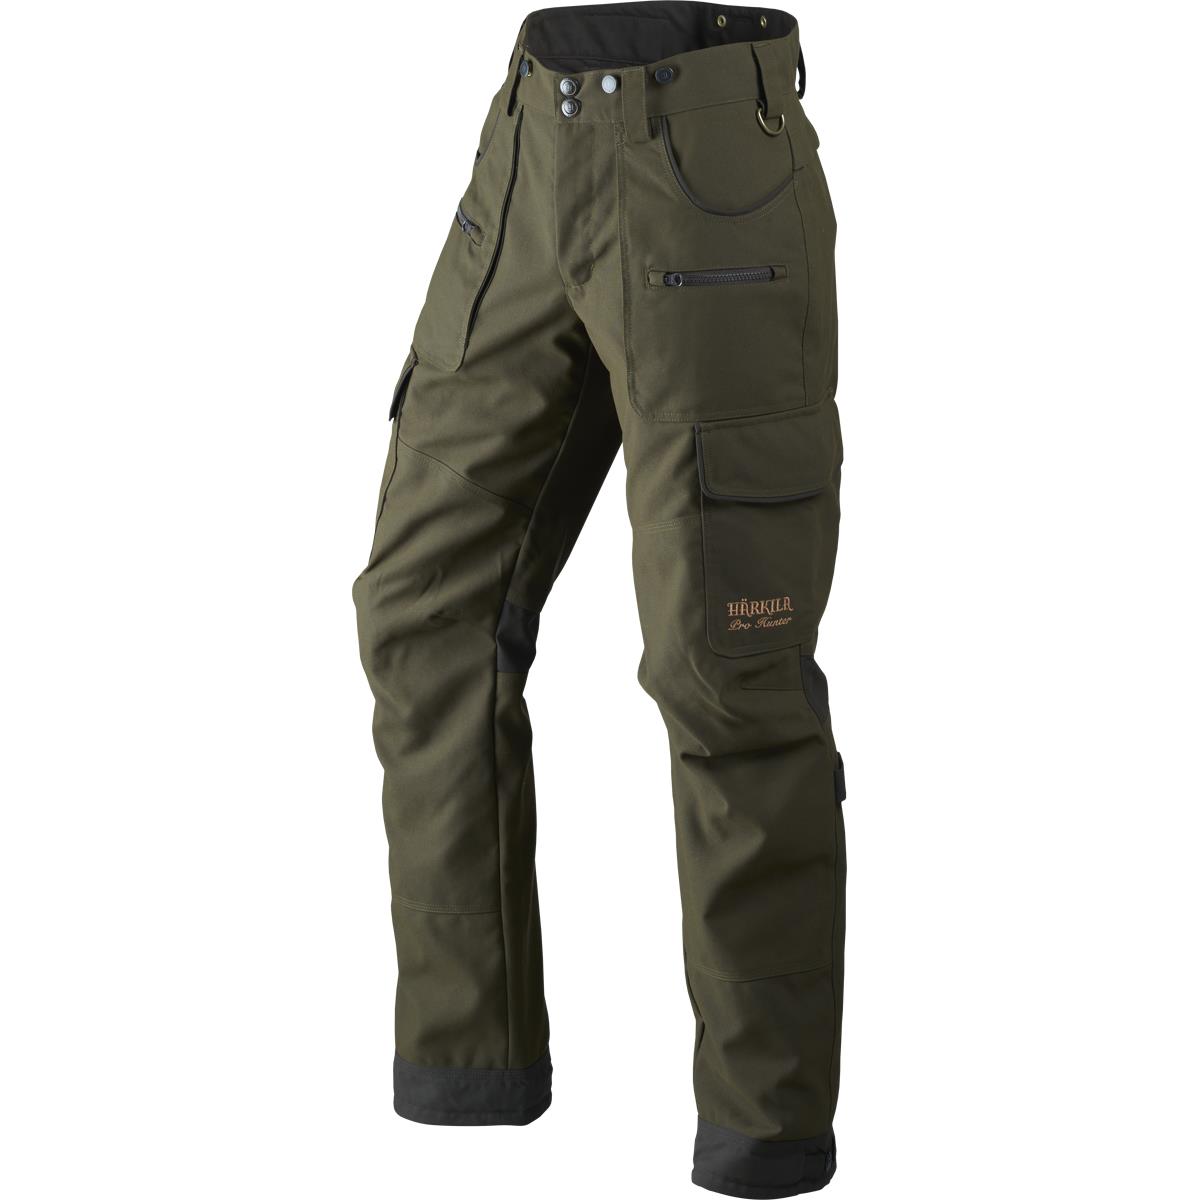 Do Harkila Pro Hunter trousers work for shooting all day?